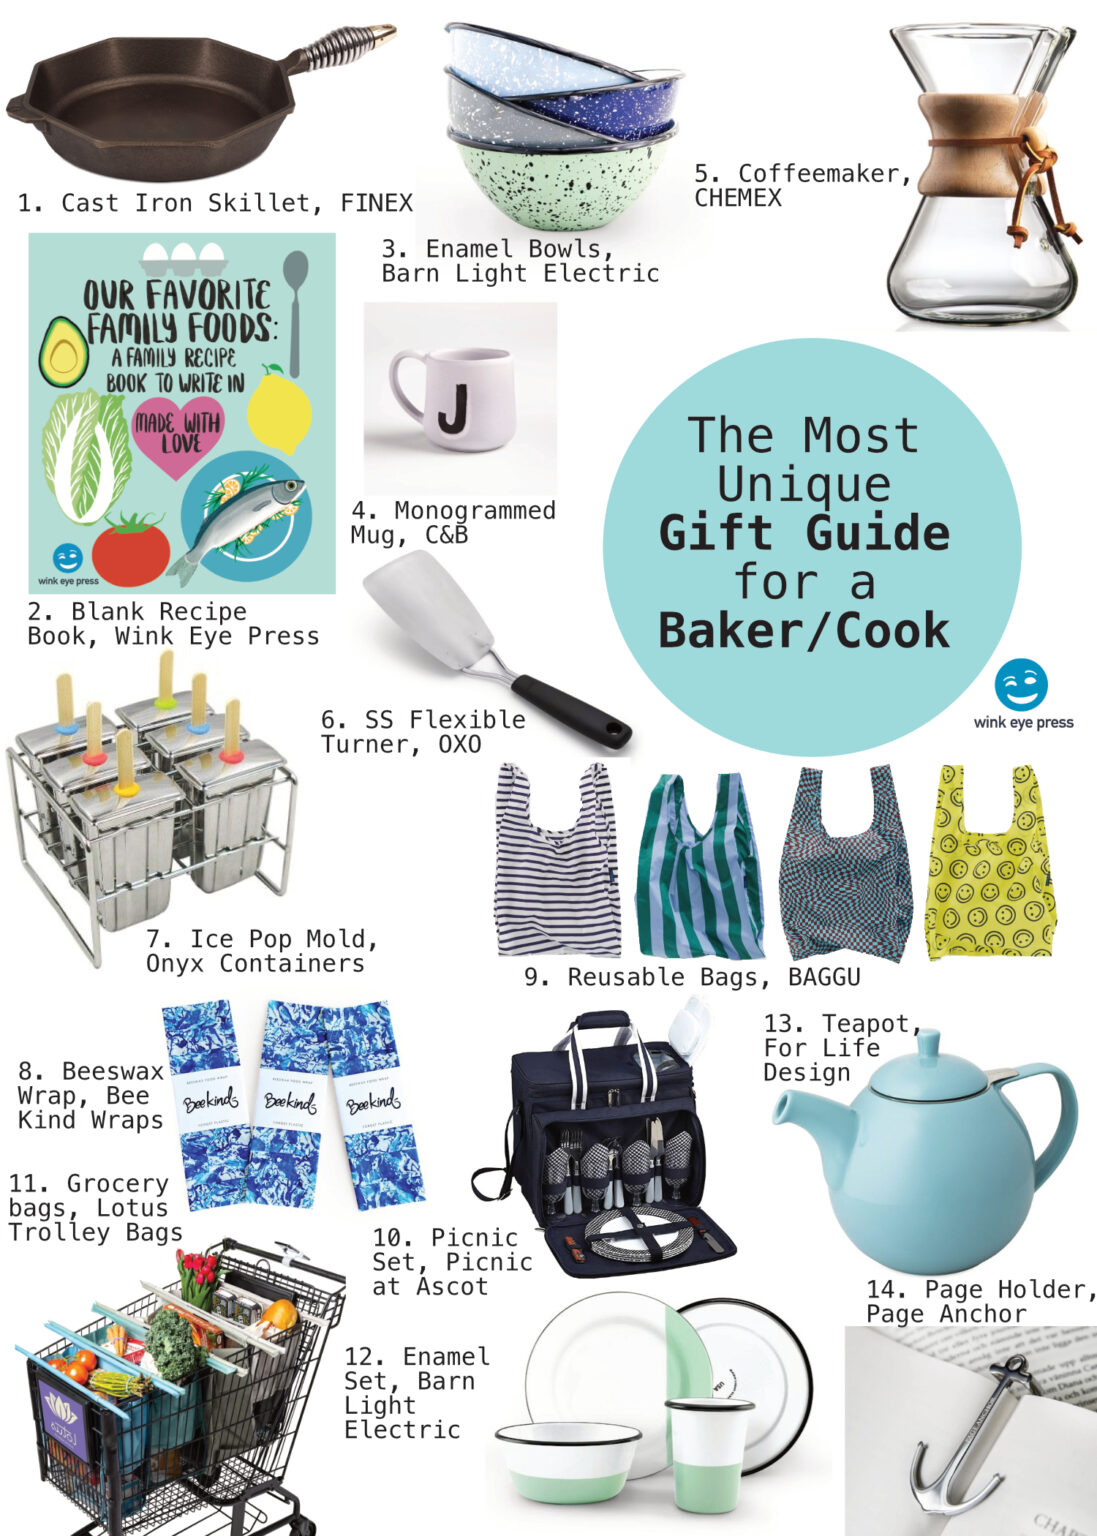 Gift guide for recipe book